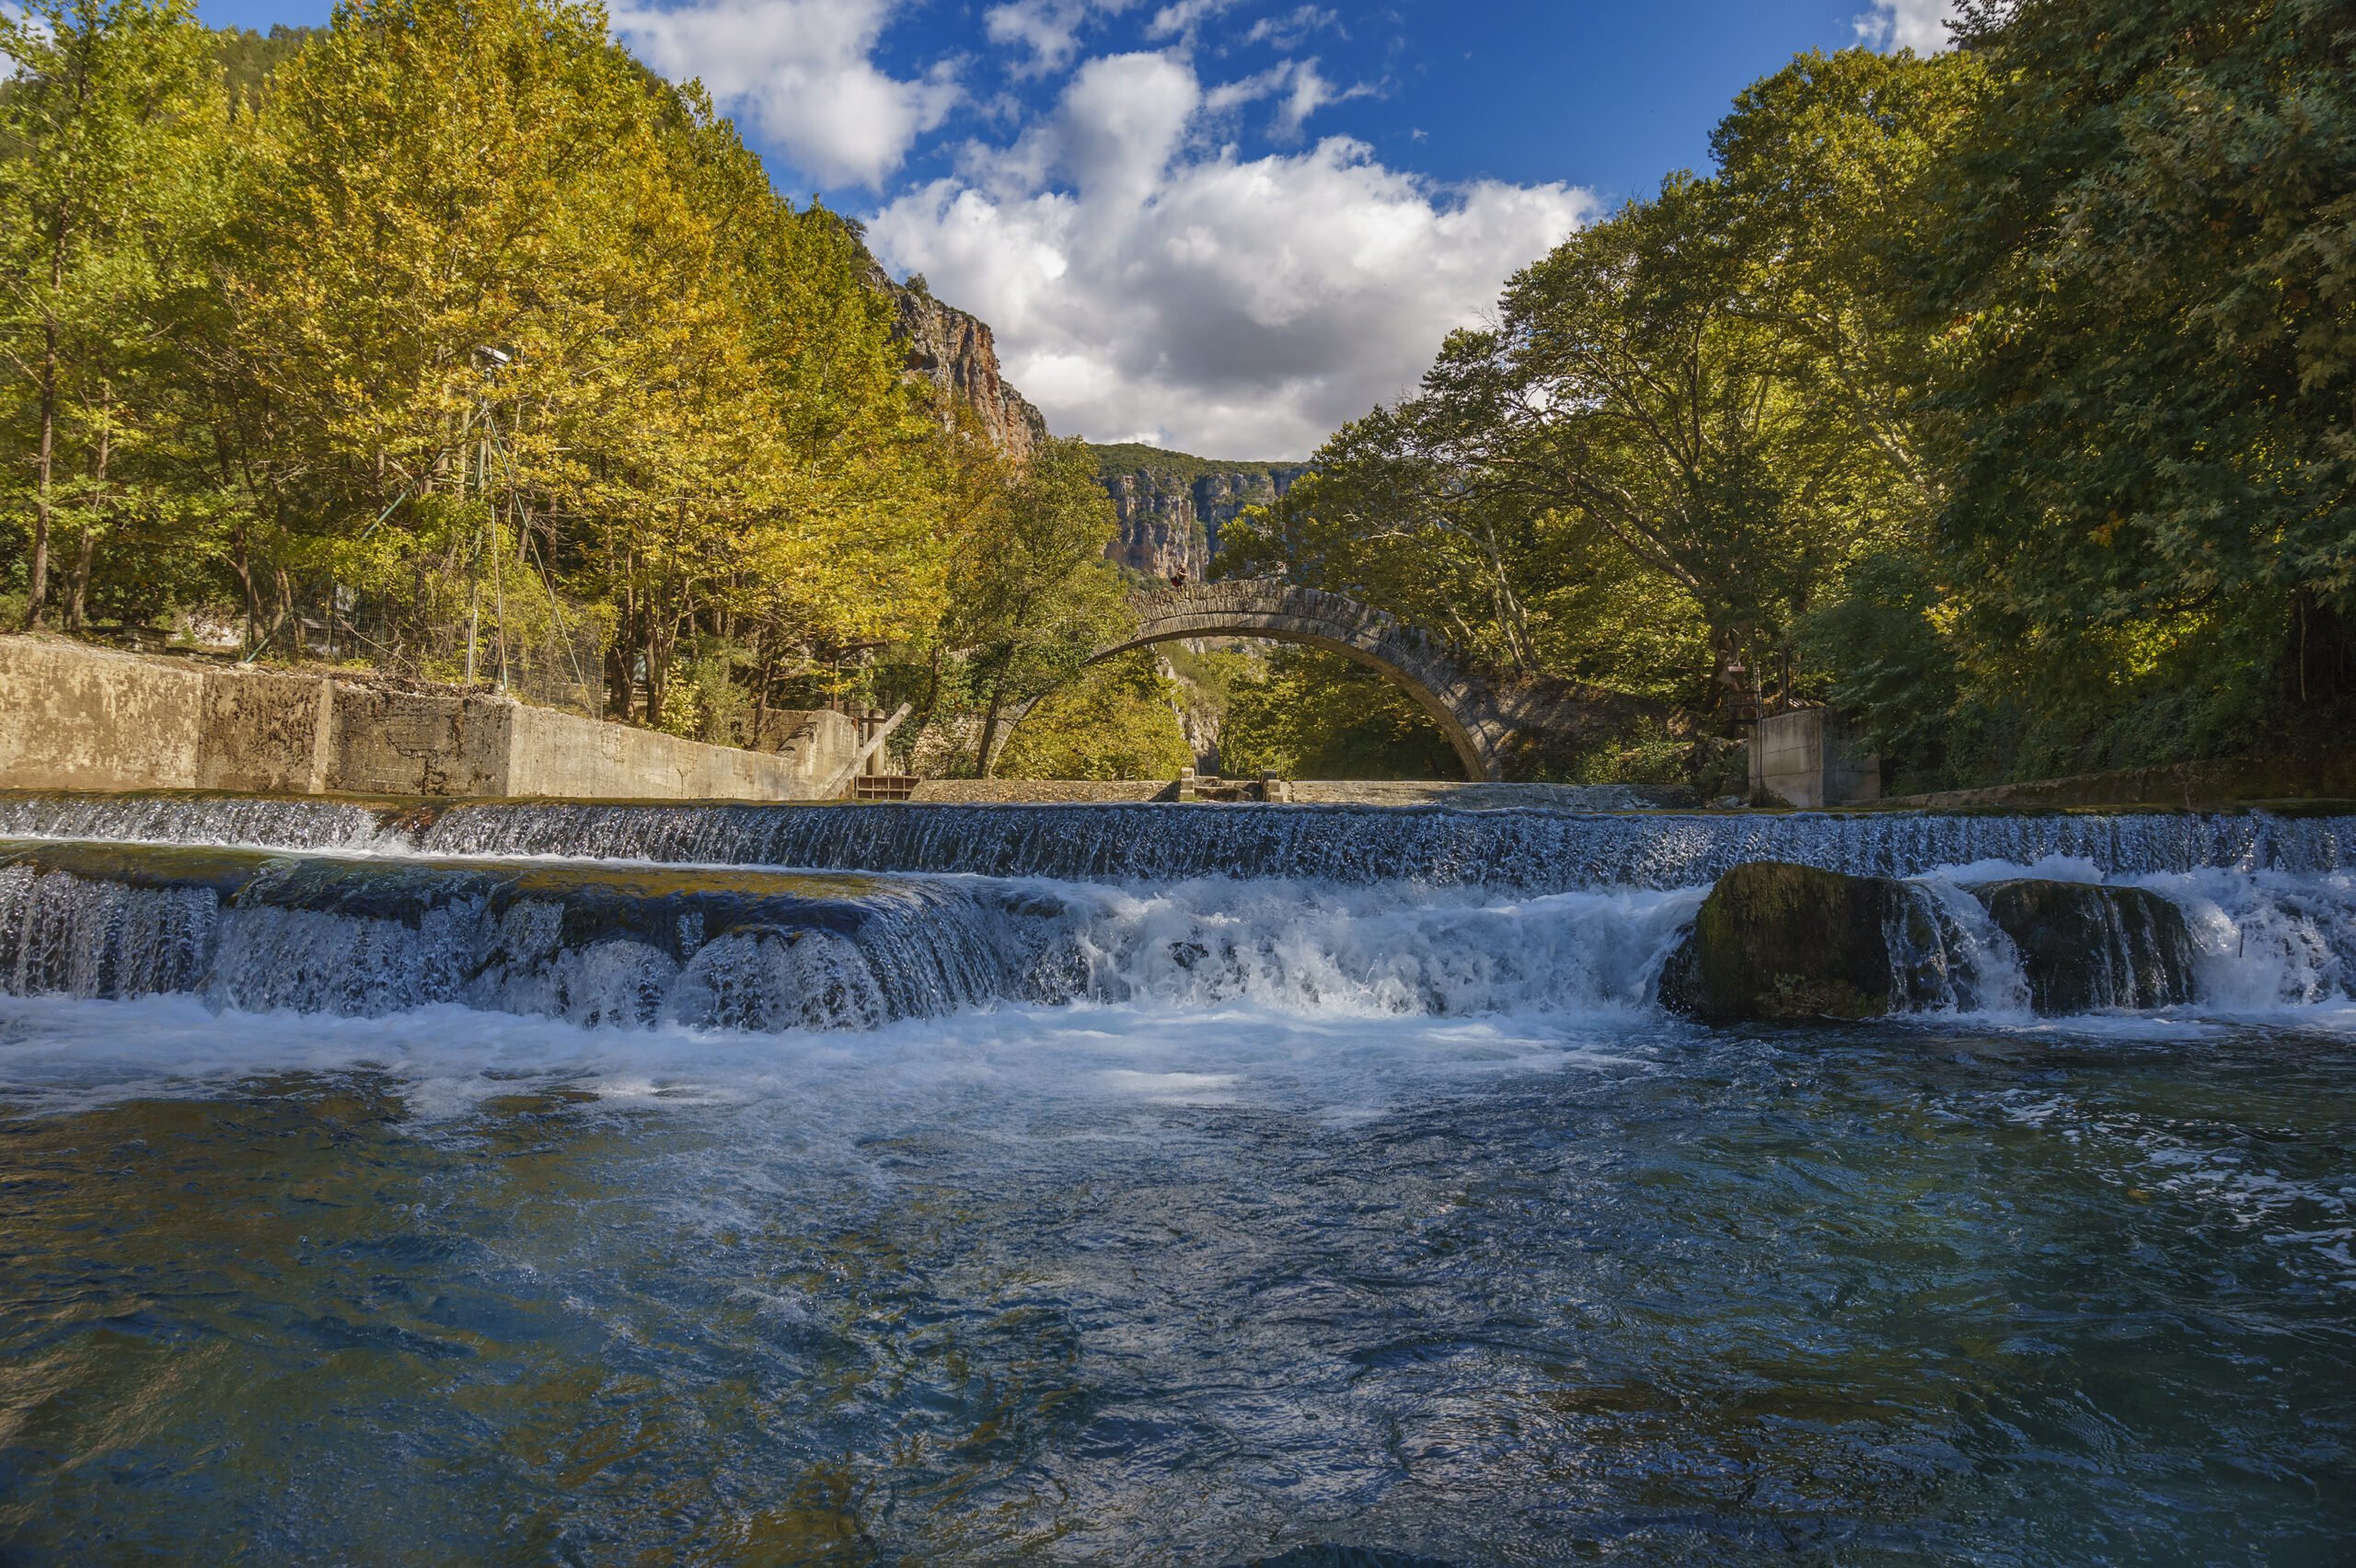 Hike Along The River On The Voidomatis Gorge Hiking Tour From Klidonia Village - Ioannina